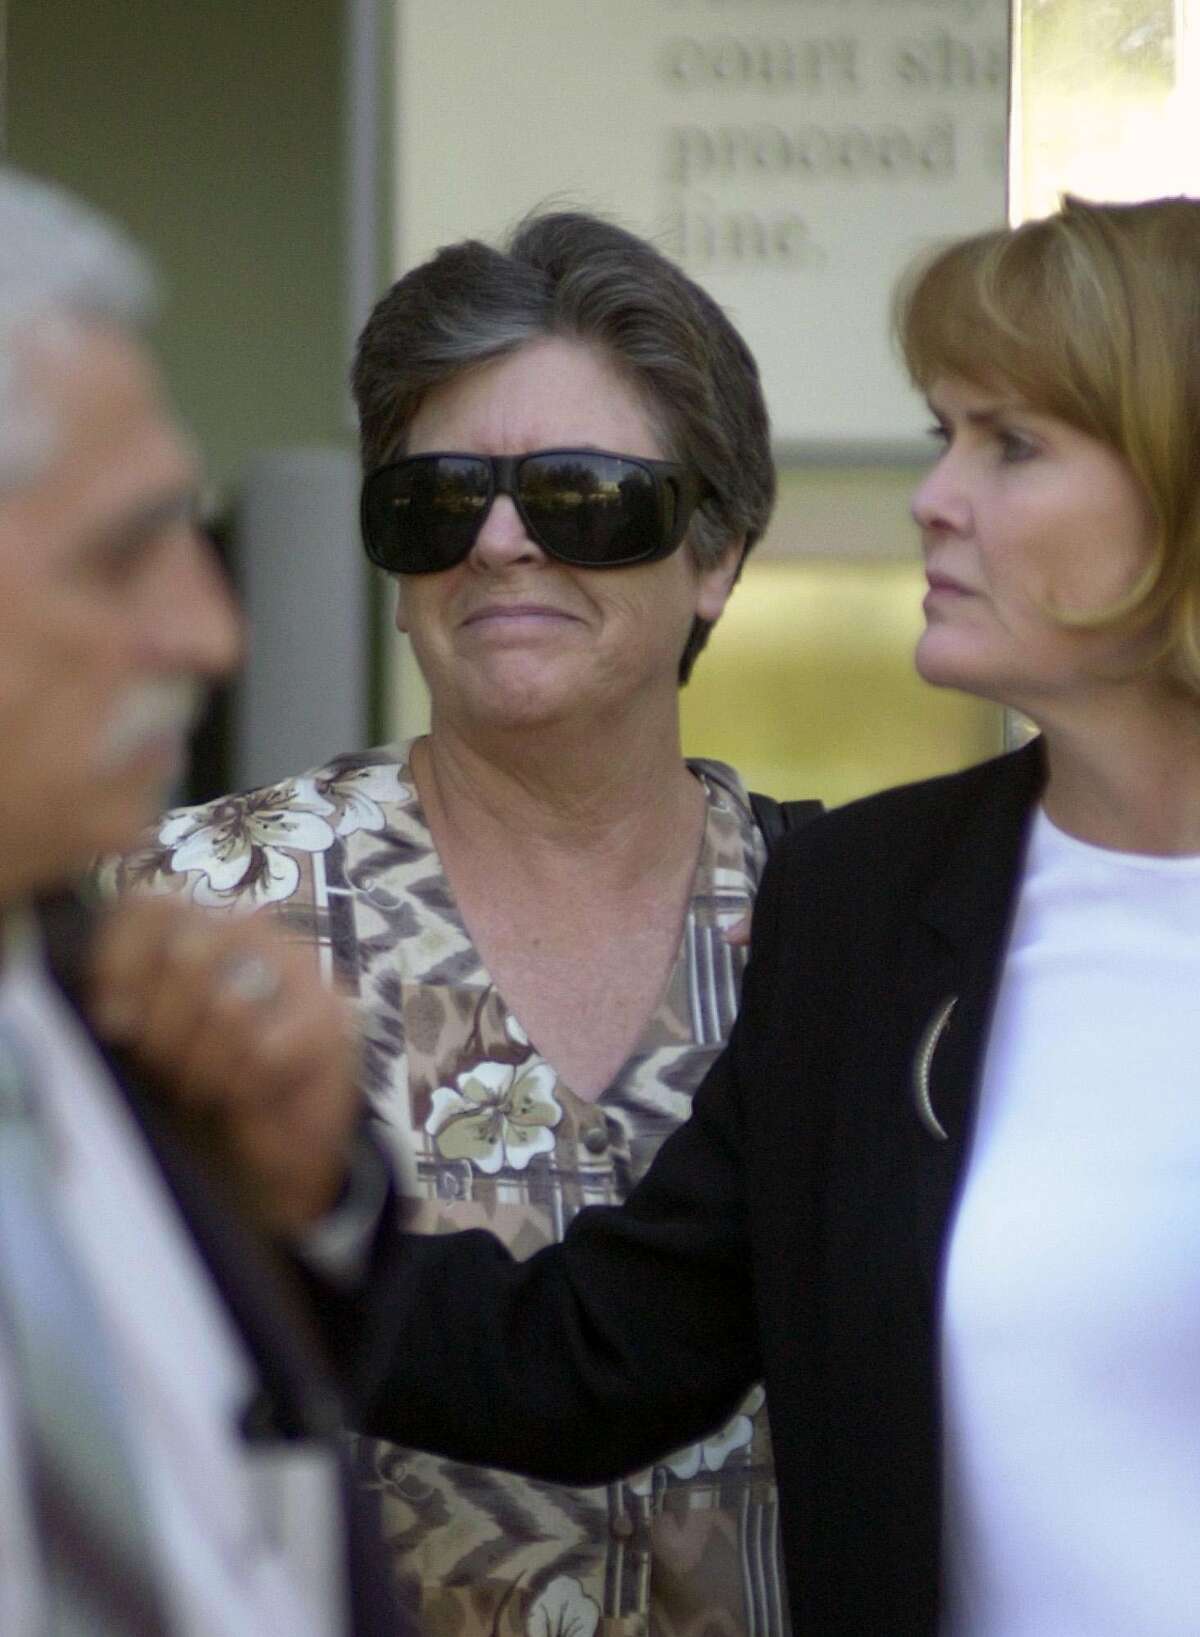 Kay Stayner, left, and her son's attorney, Marcia Morrissey, right, leave the Santa Clara Superior Court during a break in the penalty phase of her son's murder trial Thursday, Oct. 3, 2002. Kay and her husband Delbert Stayner testified as character witnesses in the penalty phase of their son's murder trial. Stayner, already serving a life sentence for the 1999 murder of Joie Armstrong, faces the death penalty for the murders of Carole and Juli Sund and Sylvina Pelosso.